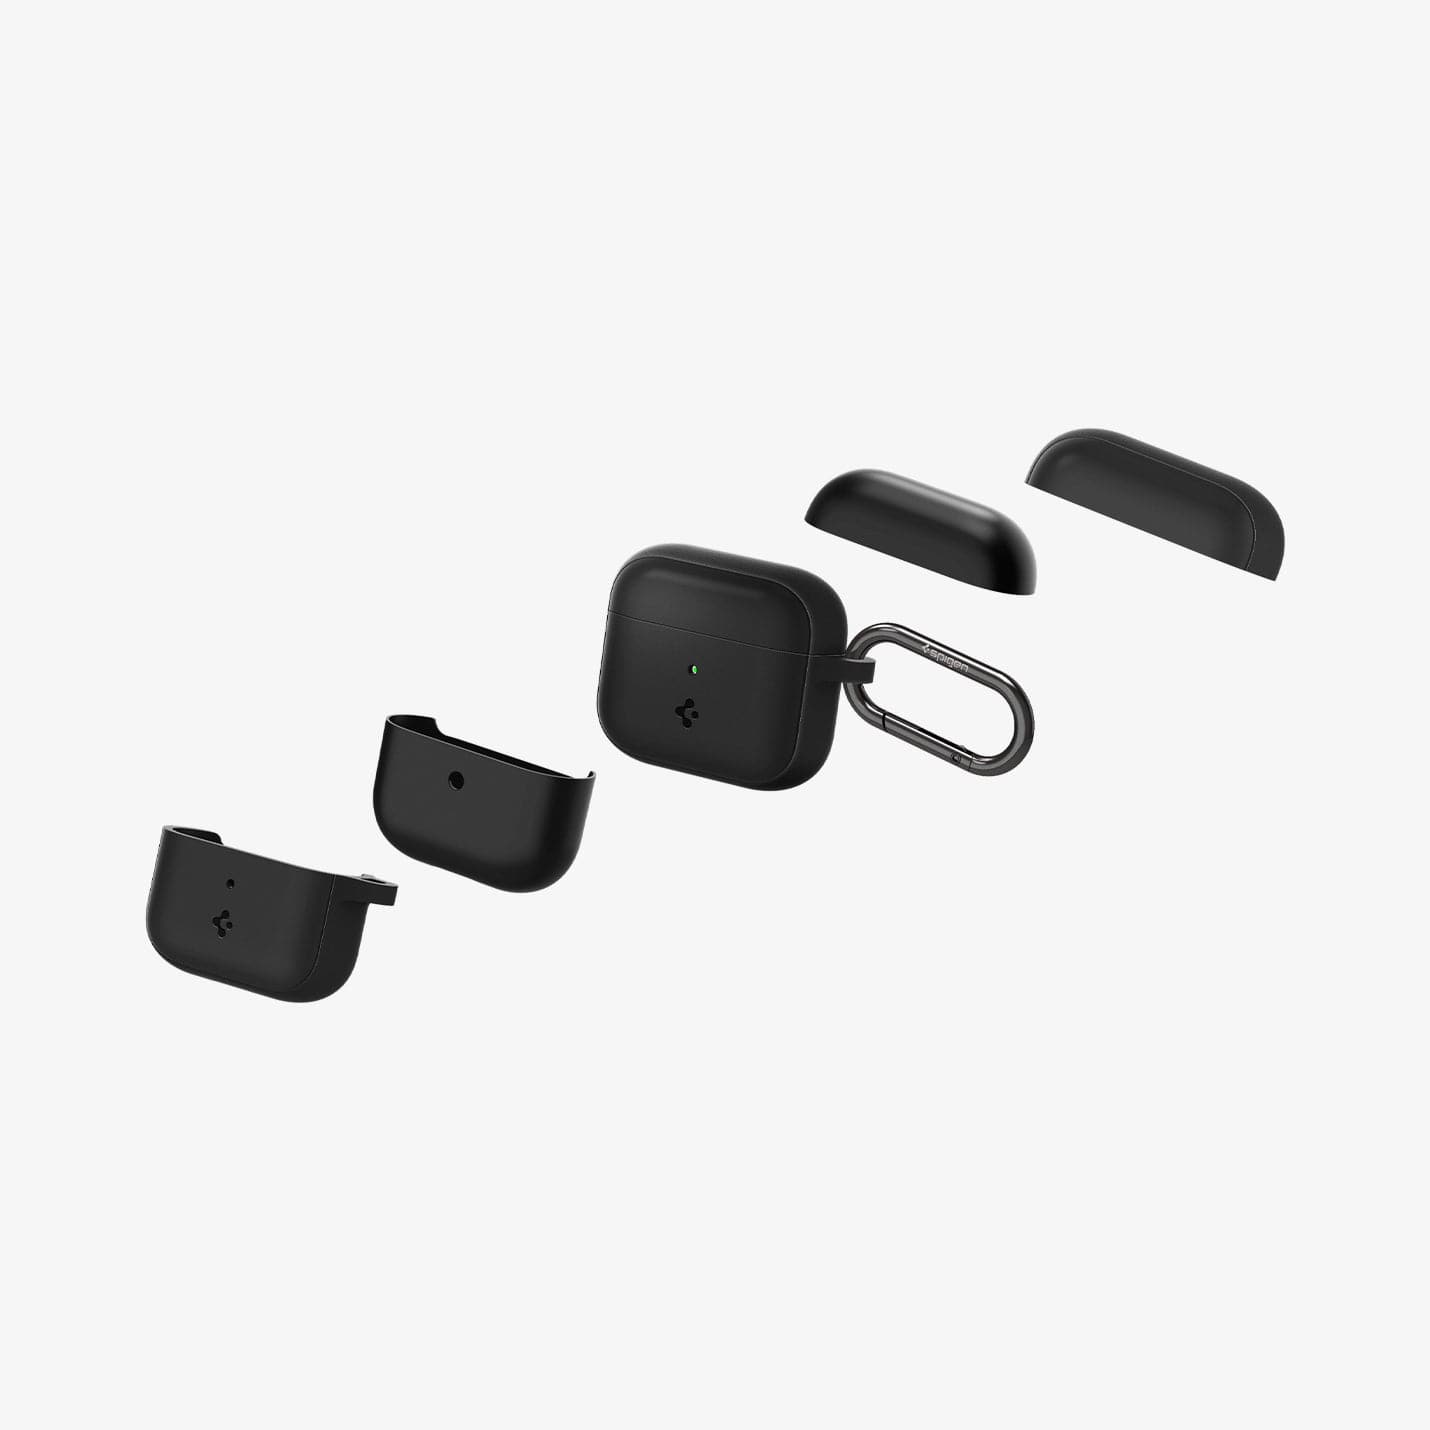 ASD01984 - Apple AirPods 3 Case Silicone Fit in black showing the multiple components of case